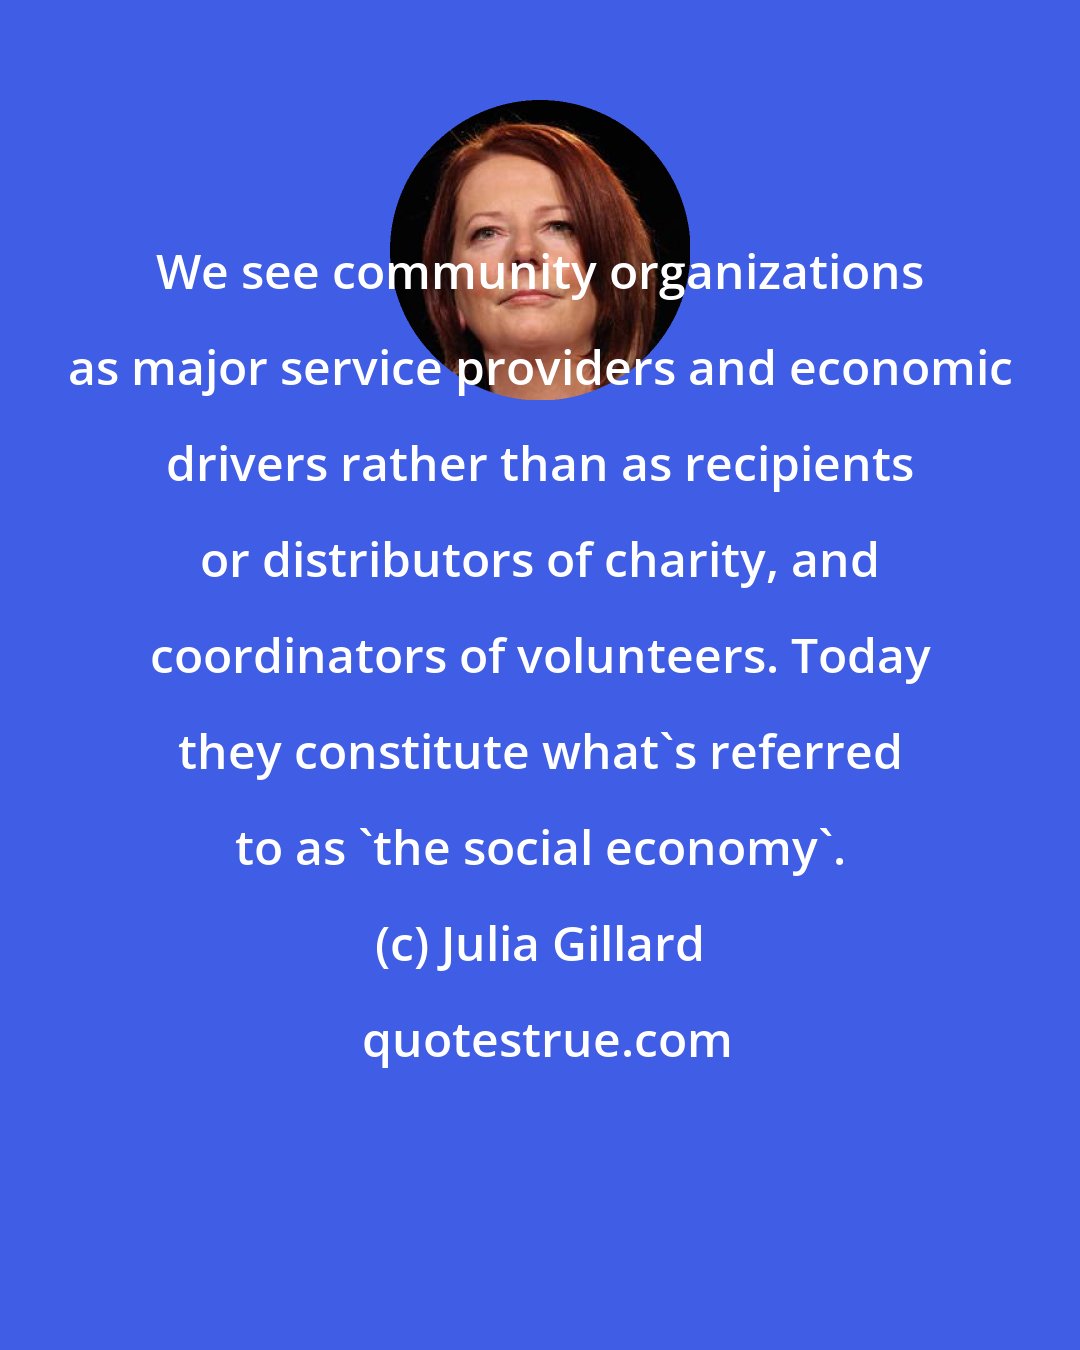 Julia Gillard: We see community organizations as major service providers and economic drivers rather than as recipients or distributors of charity, and coordinators of volunteers. Today they constitute what's referred to as 'the social economy'.